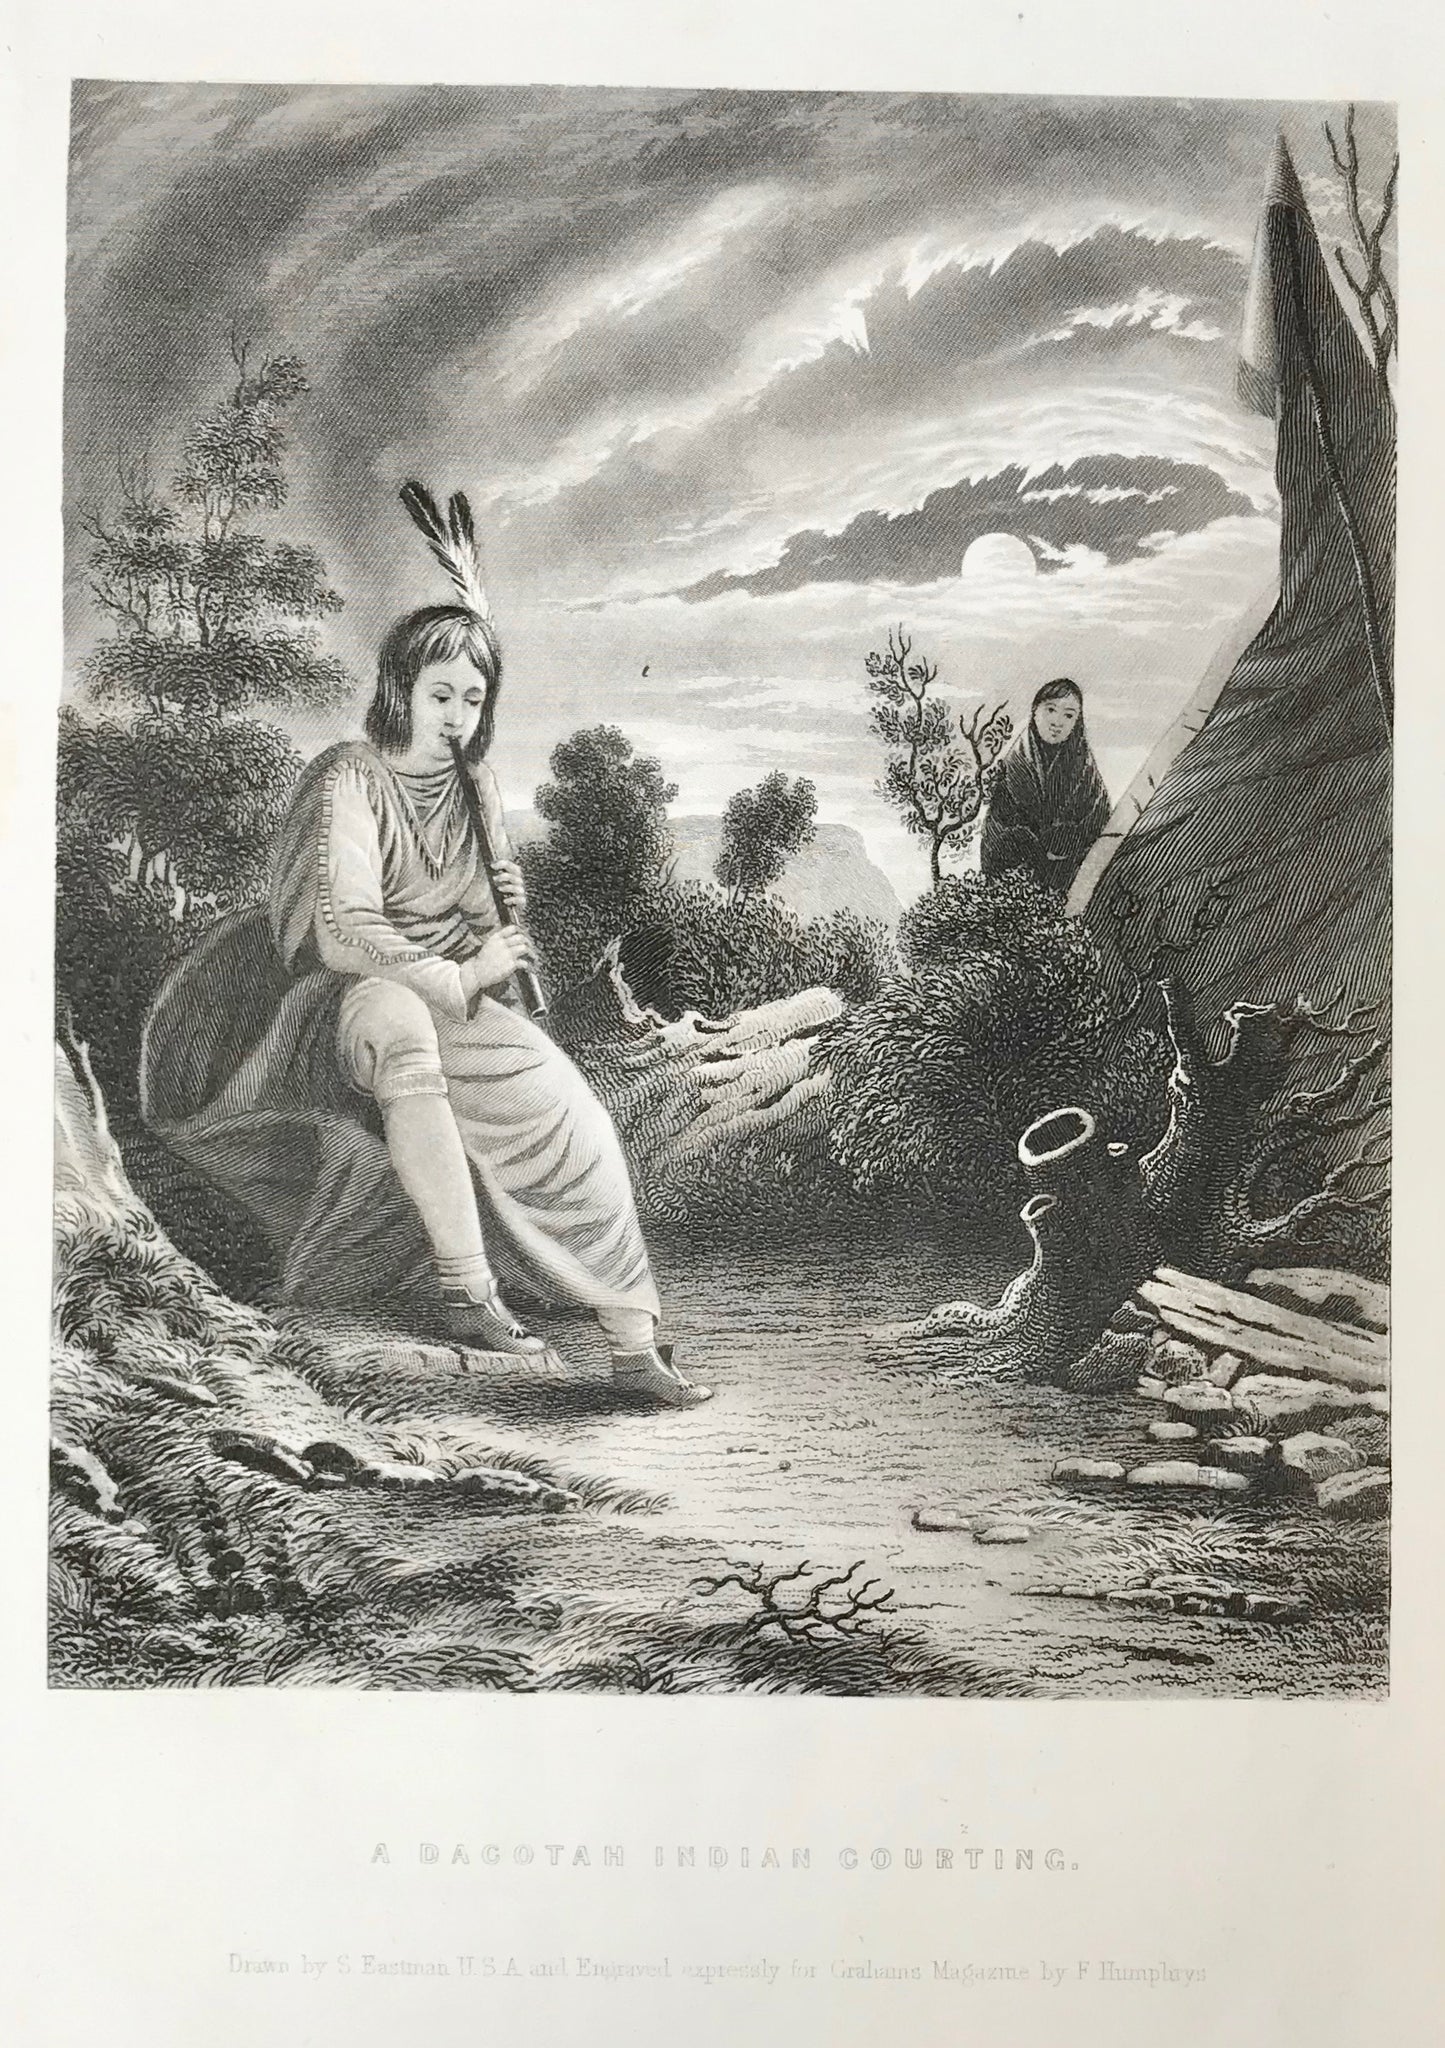 "A Dacotah Indian Courting".  Steel engraving made after the drawing by S. Eastman ca 1850.